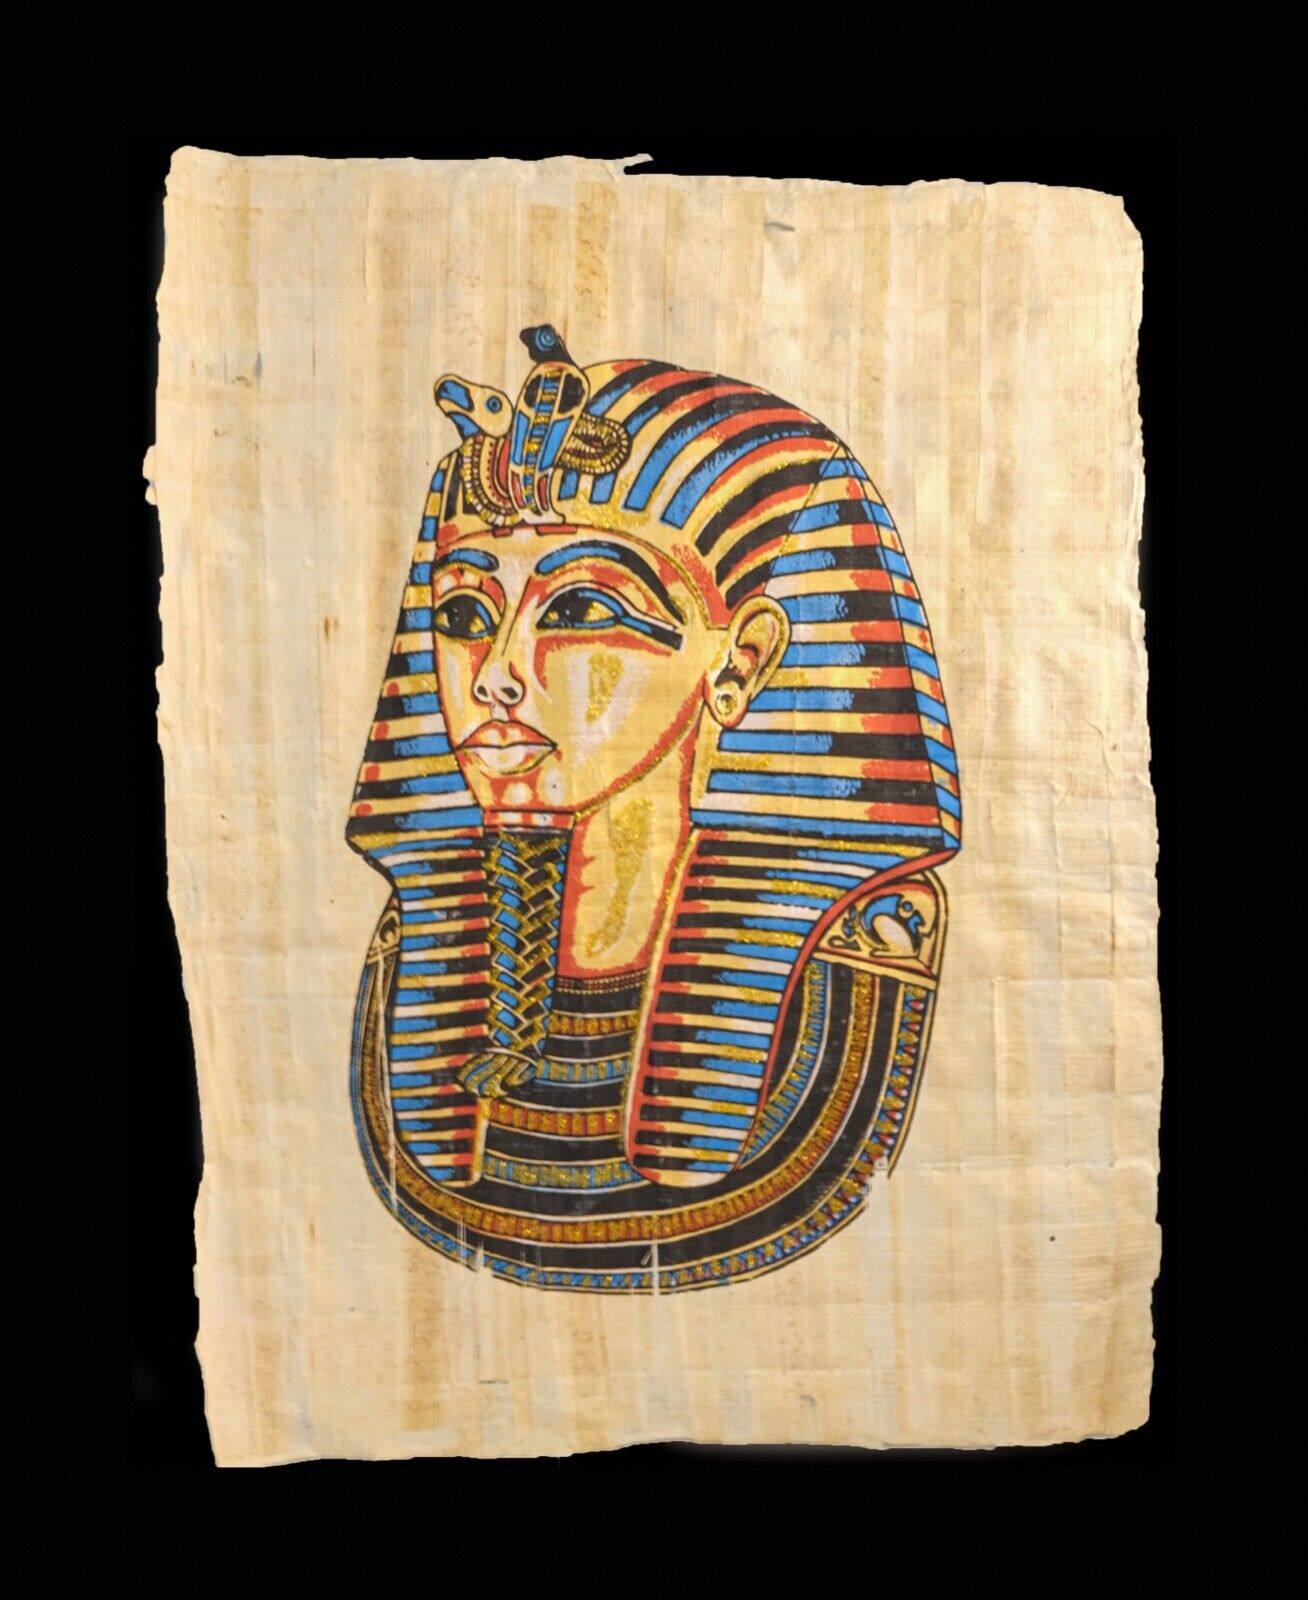 Rare Ancient Hand Painted Egyptian Papyrus-Mask of King Tut Ankh Amun 